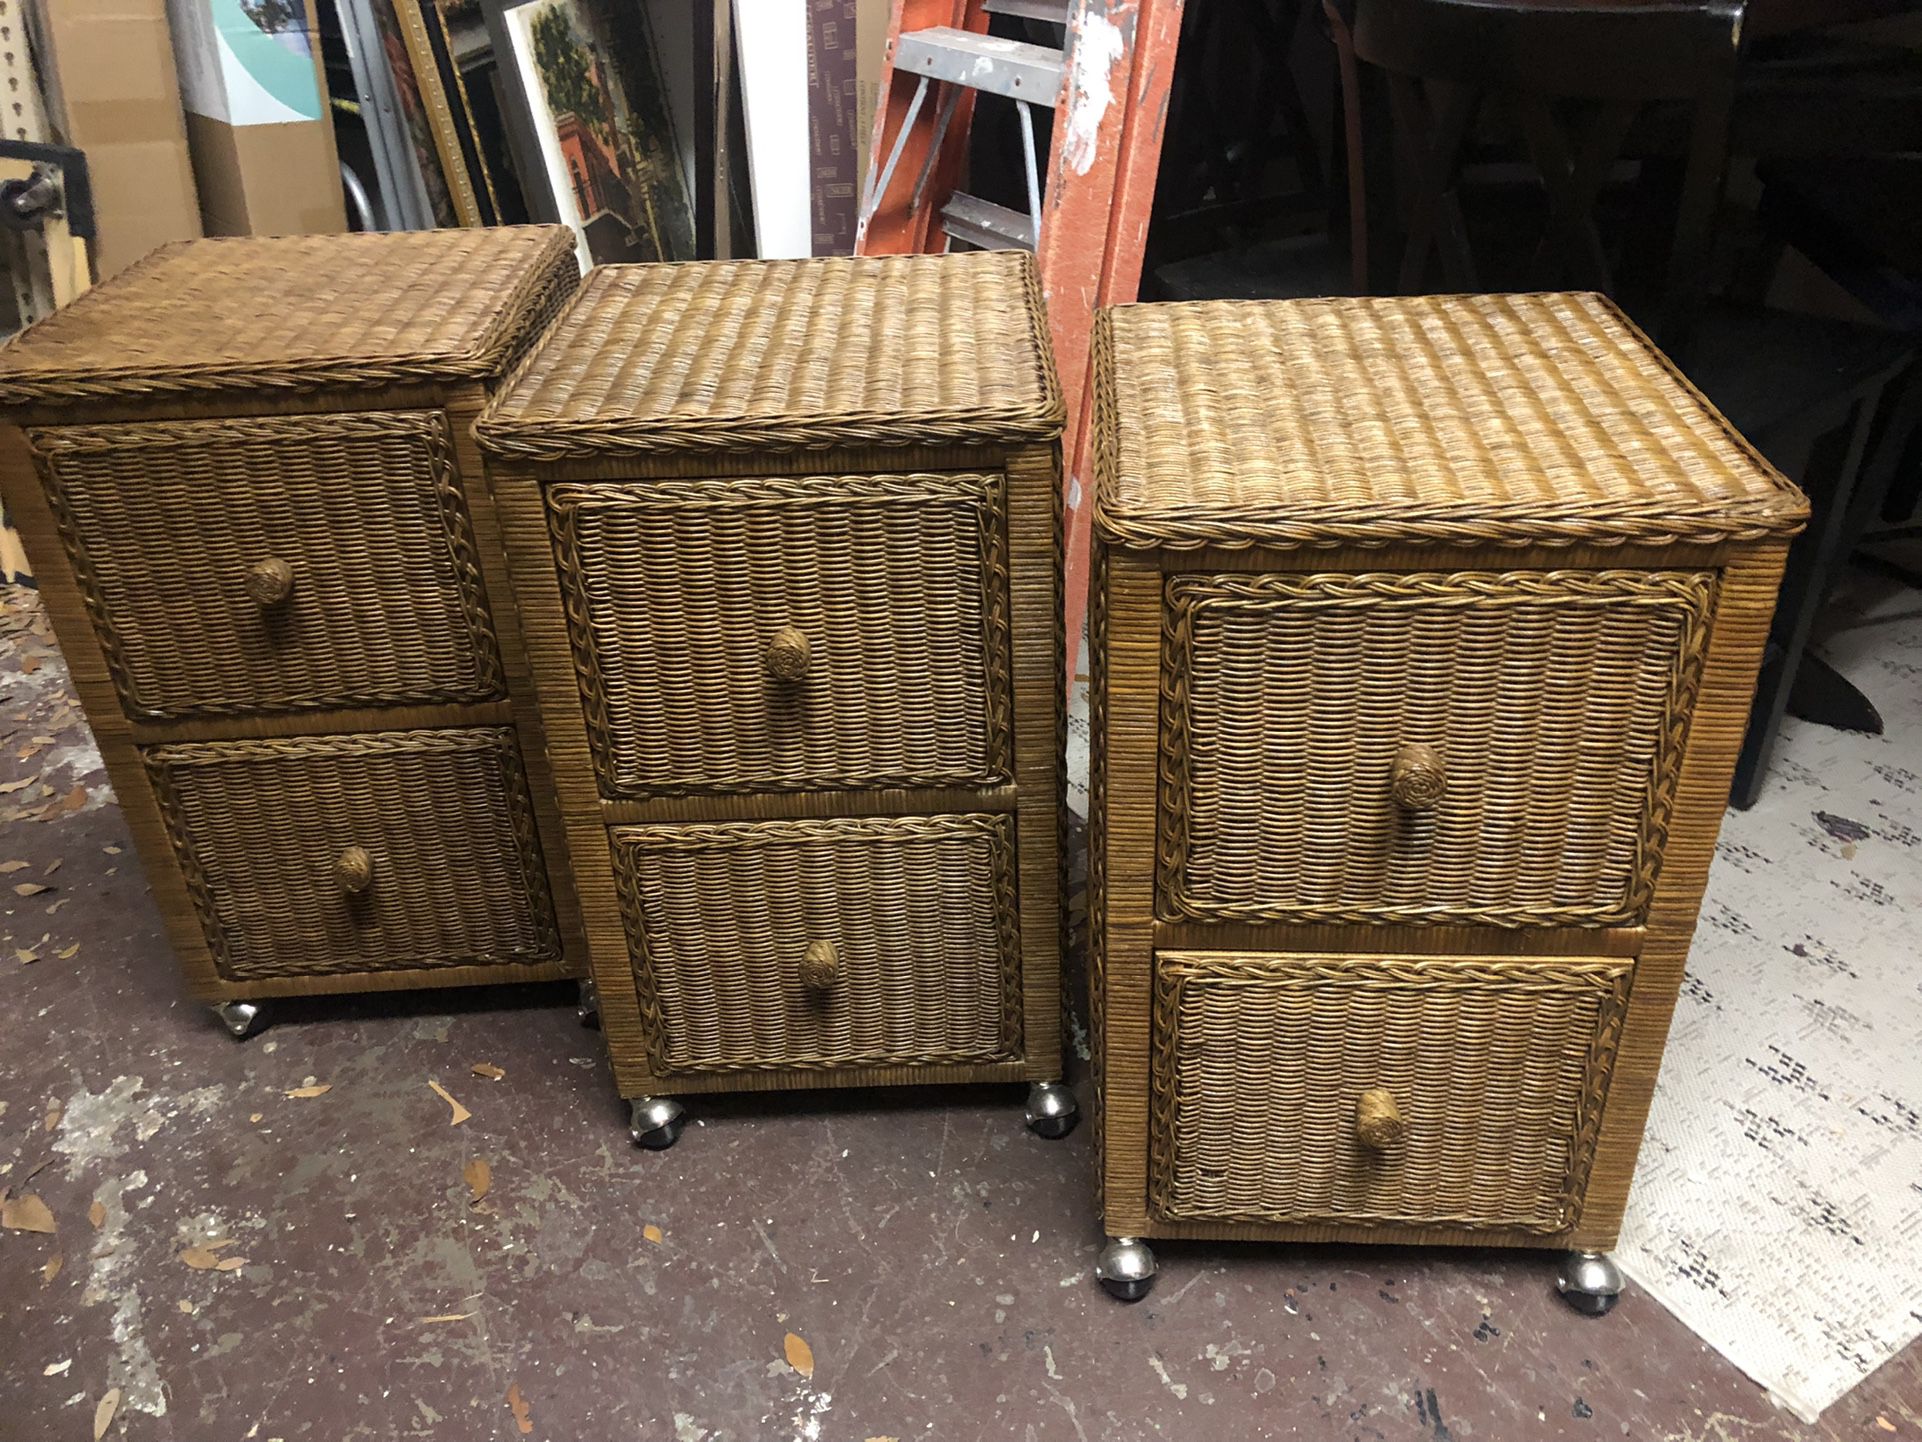 Wicker File Cabinets - 3 Available